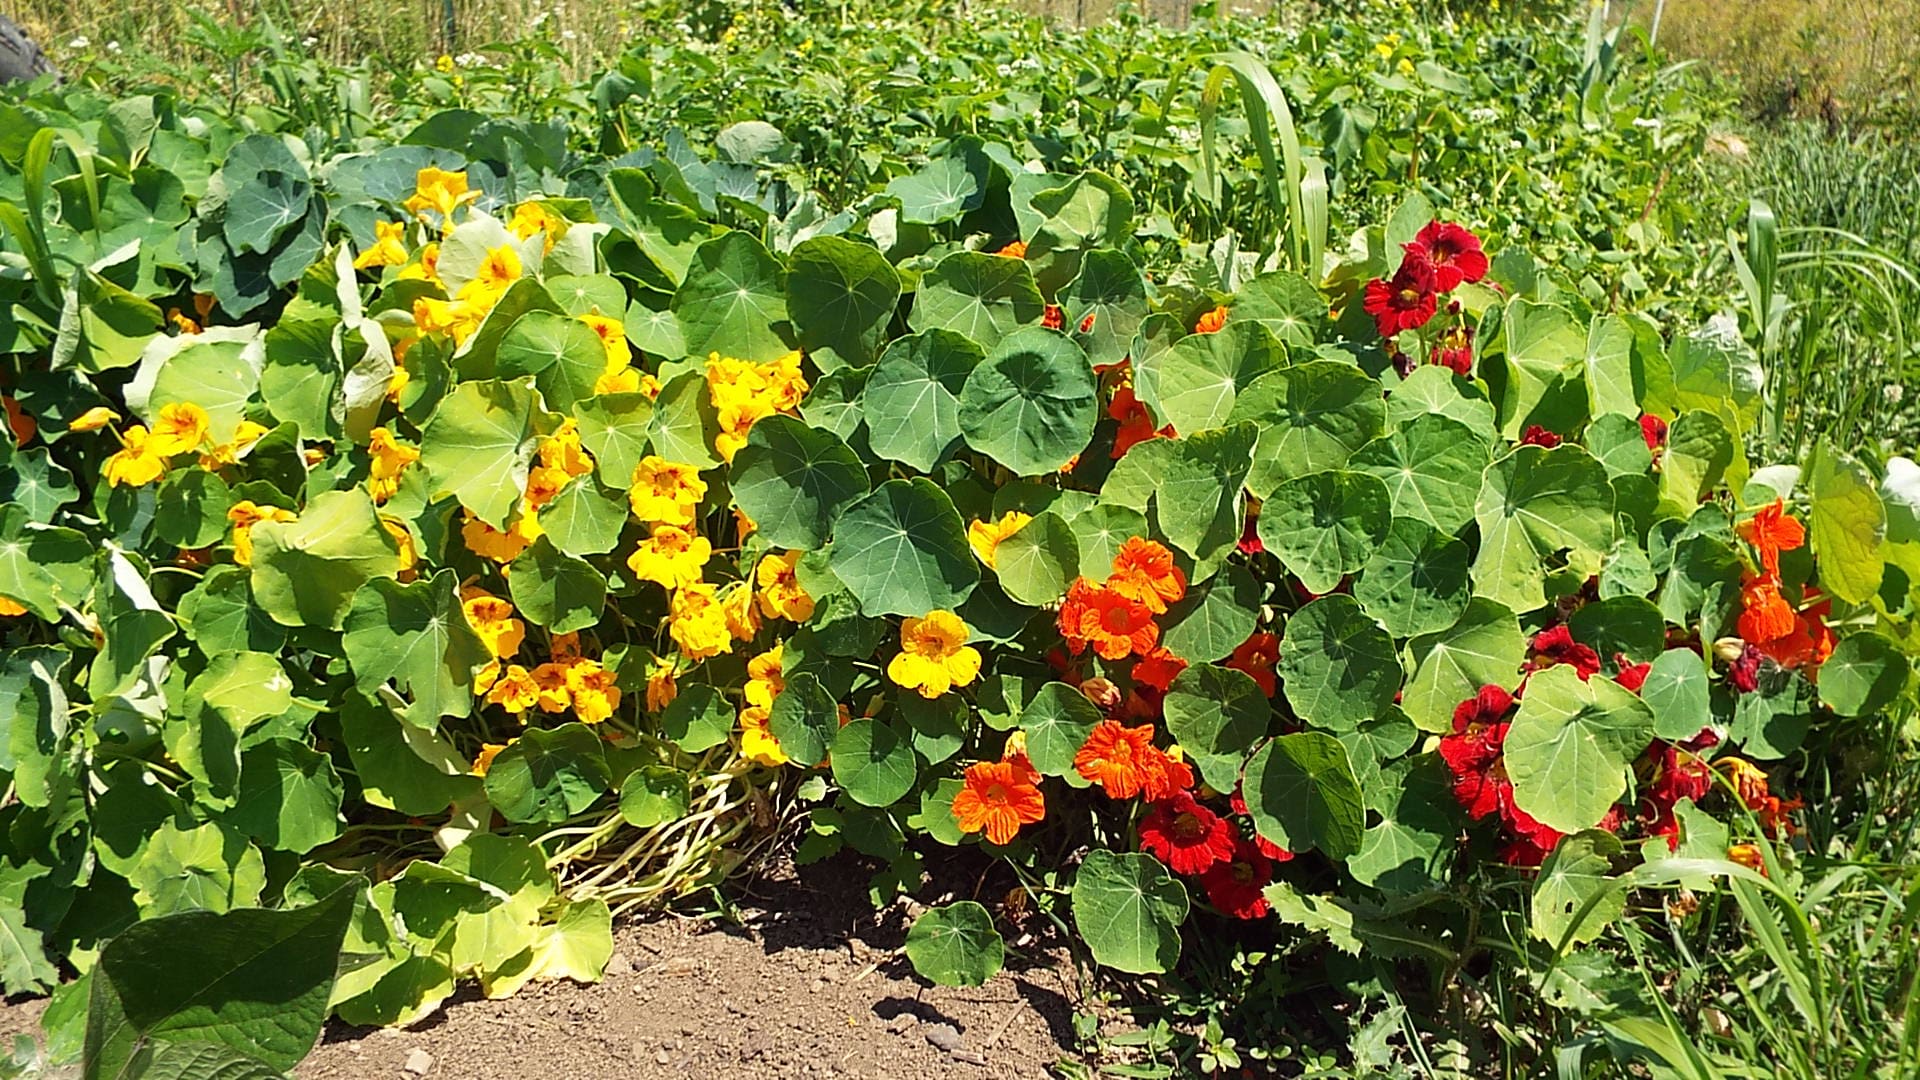 Nasturtiums are not only lovely, they are edible and make good companions for green beans.